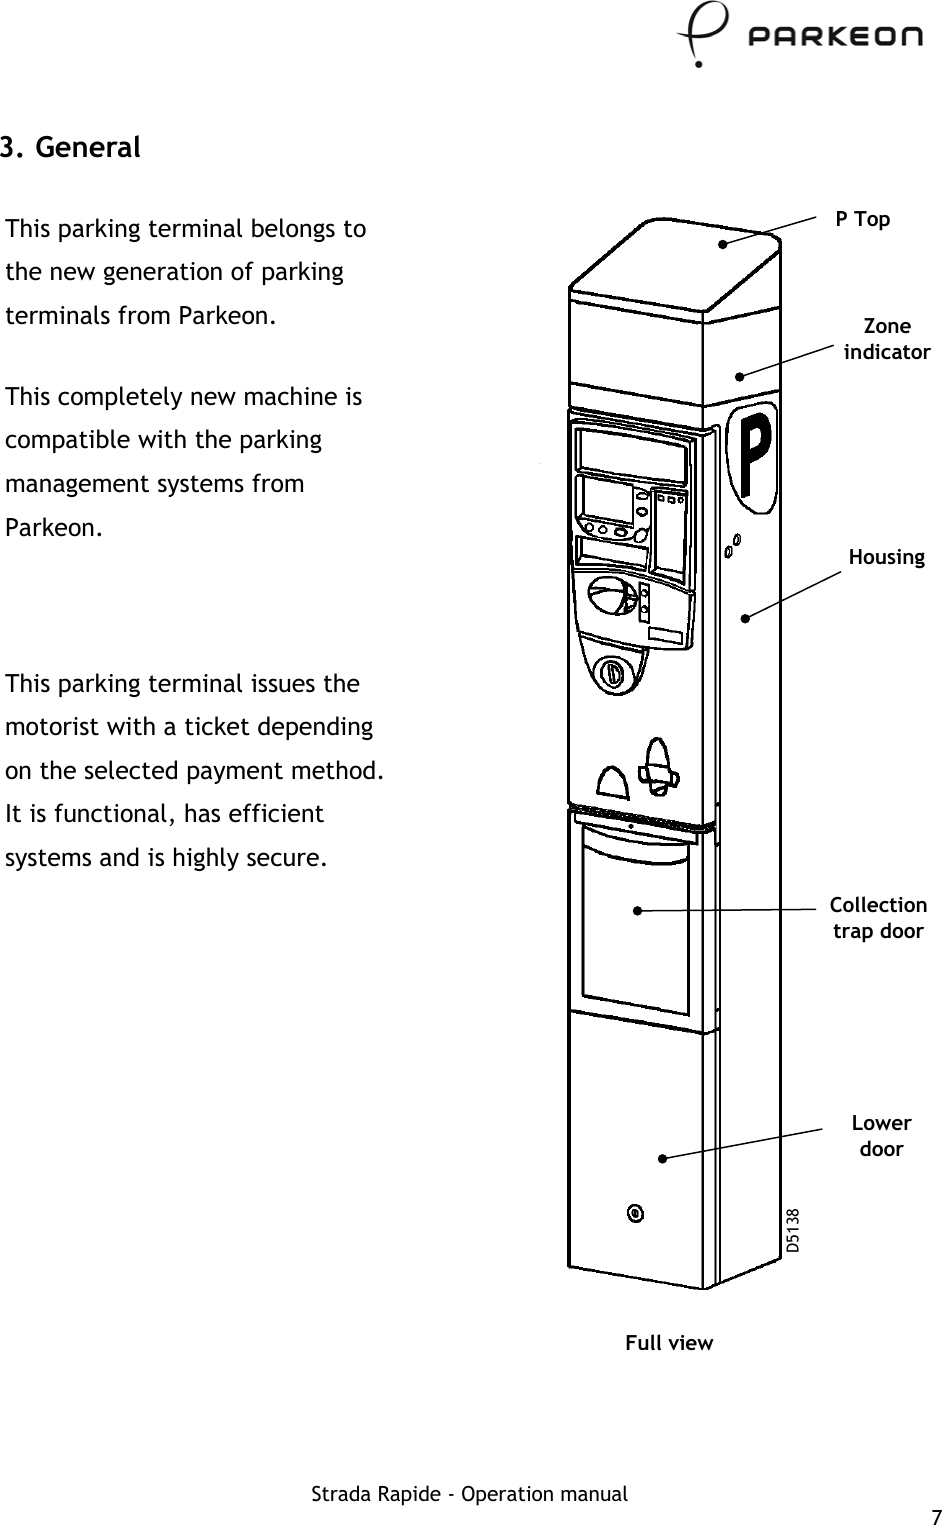     3. General This parking terminal belongs to the new generation of parking terminals from Parkeon.  This completely new machine is compatible with the parking management systems from Parkeon. This parking terminal issues the motorist with a ticket depending on the selected payment method. It is functional, has efficient systems and is highly secure.  Full view P Top Zone indicator Housing Collection trap door Lower door D5138  Strada Rapide - Operation manual  7 